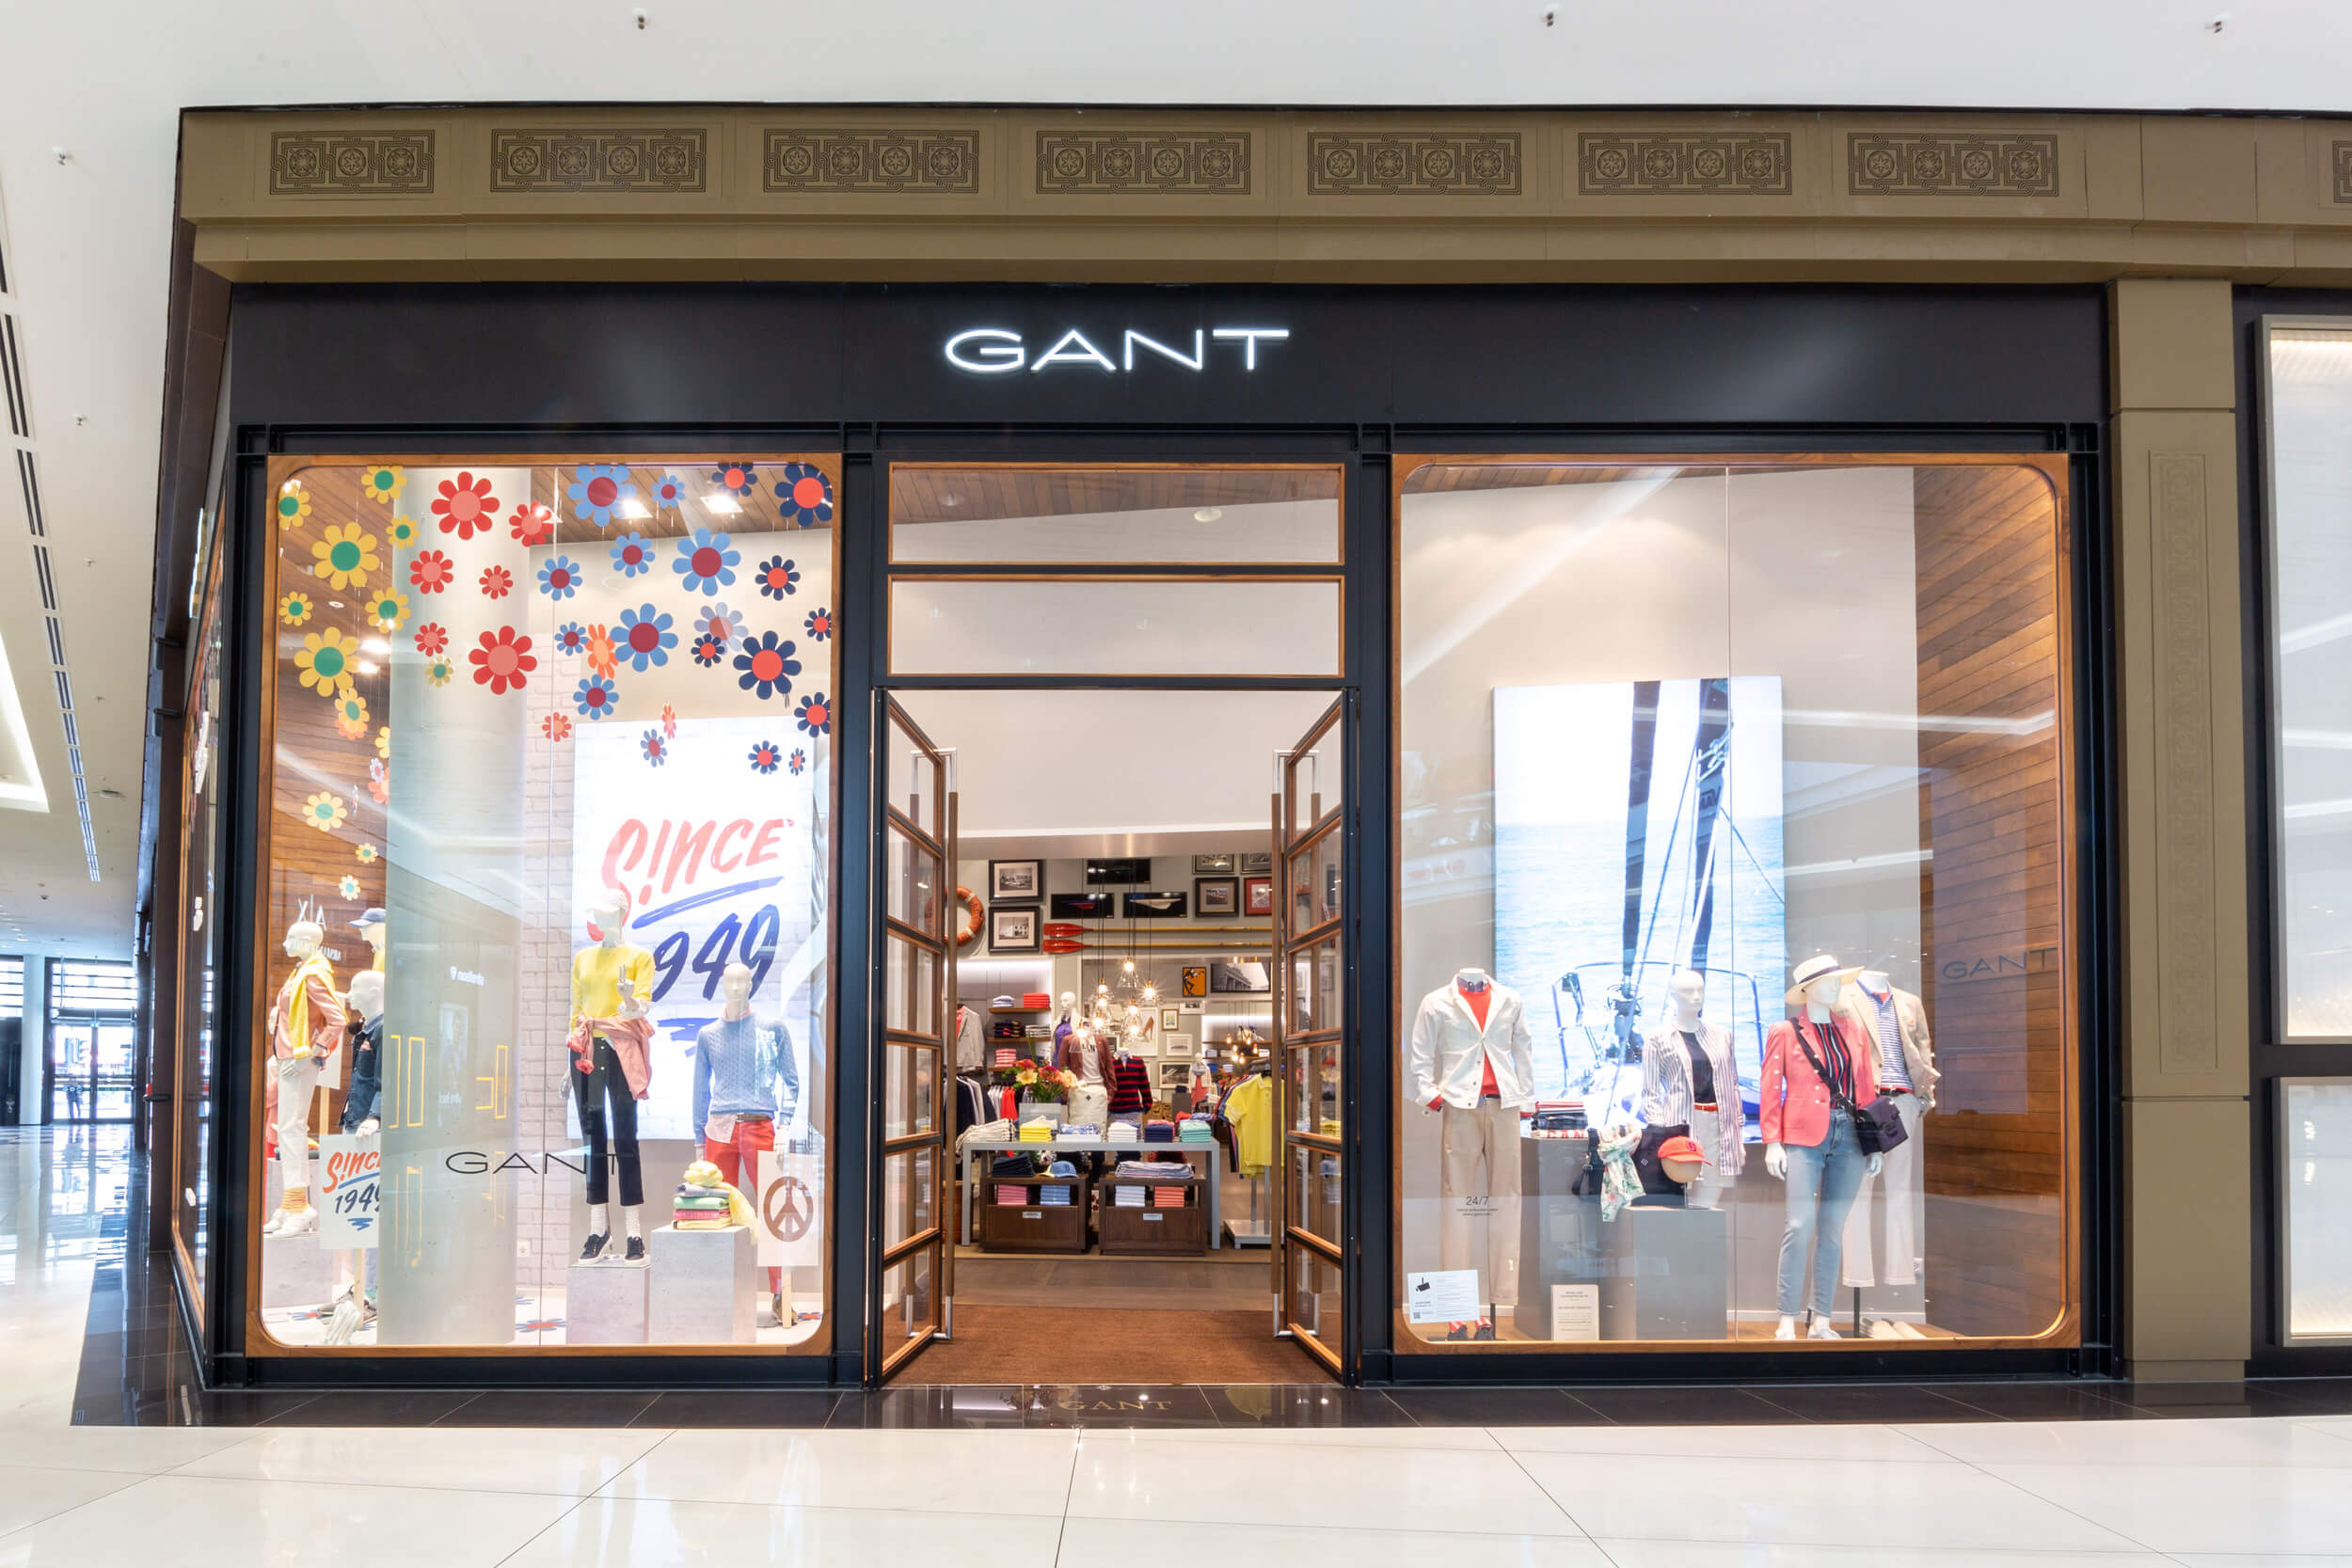 Gant at the Mall of Berlin